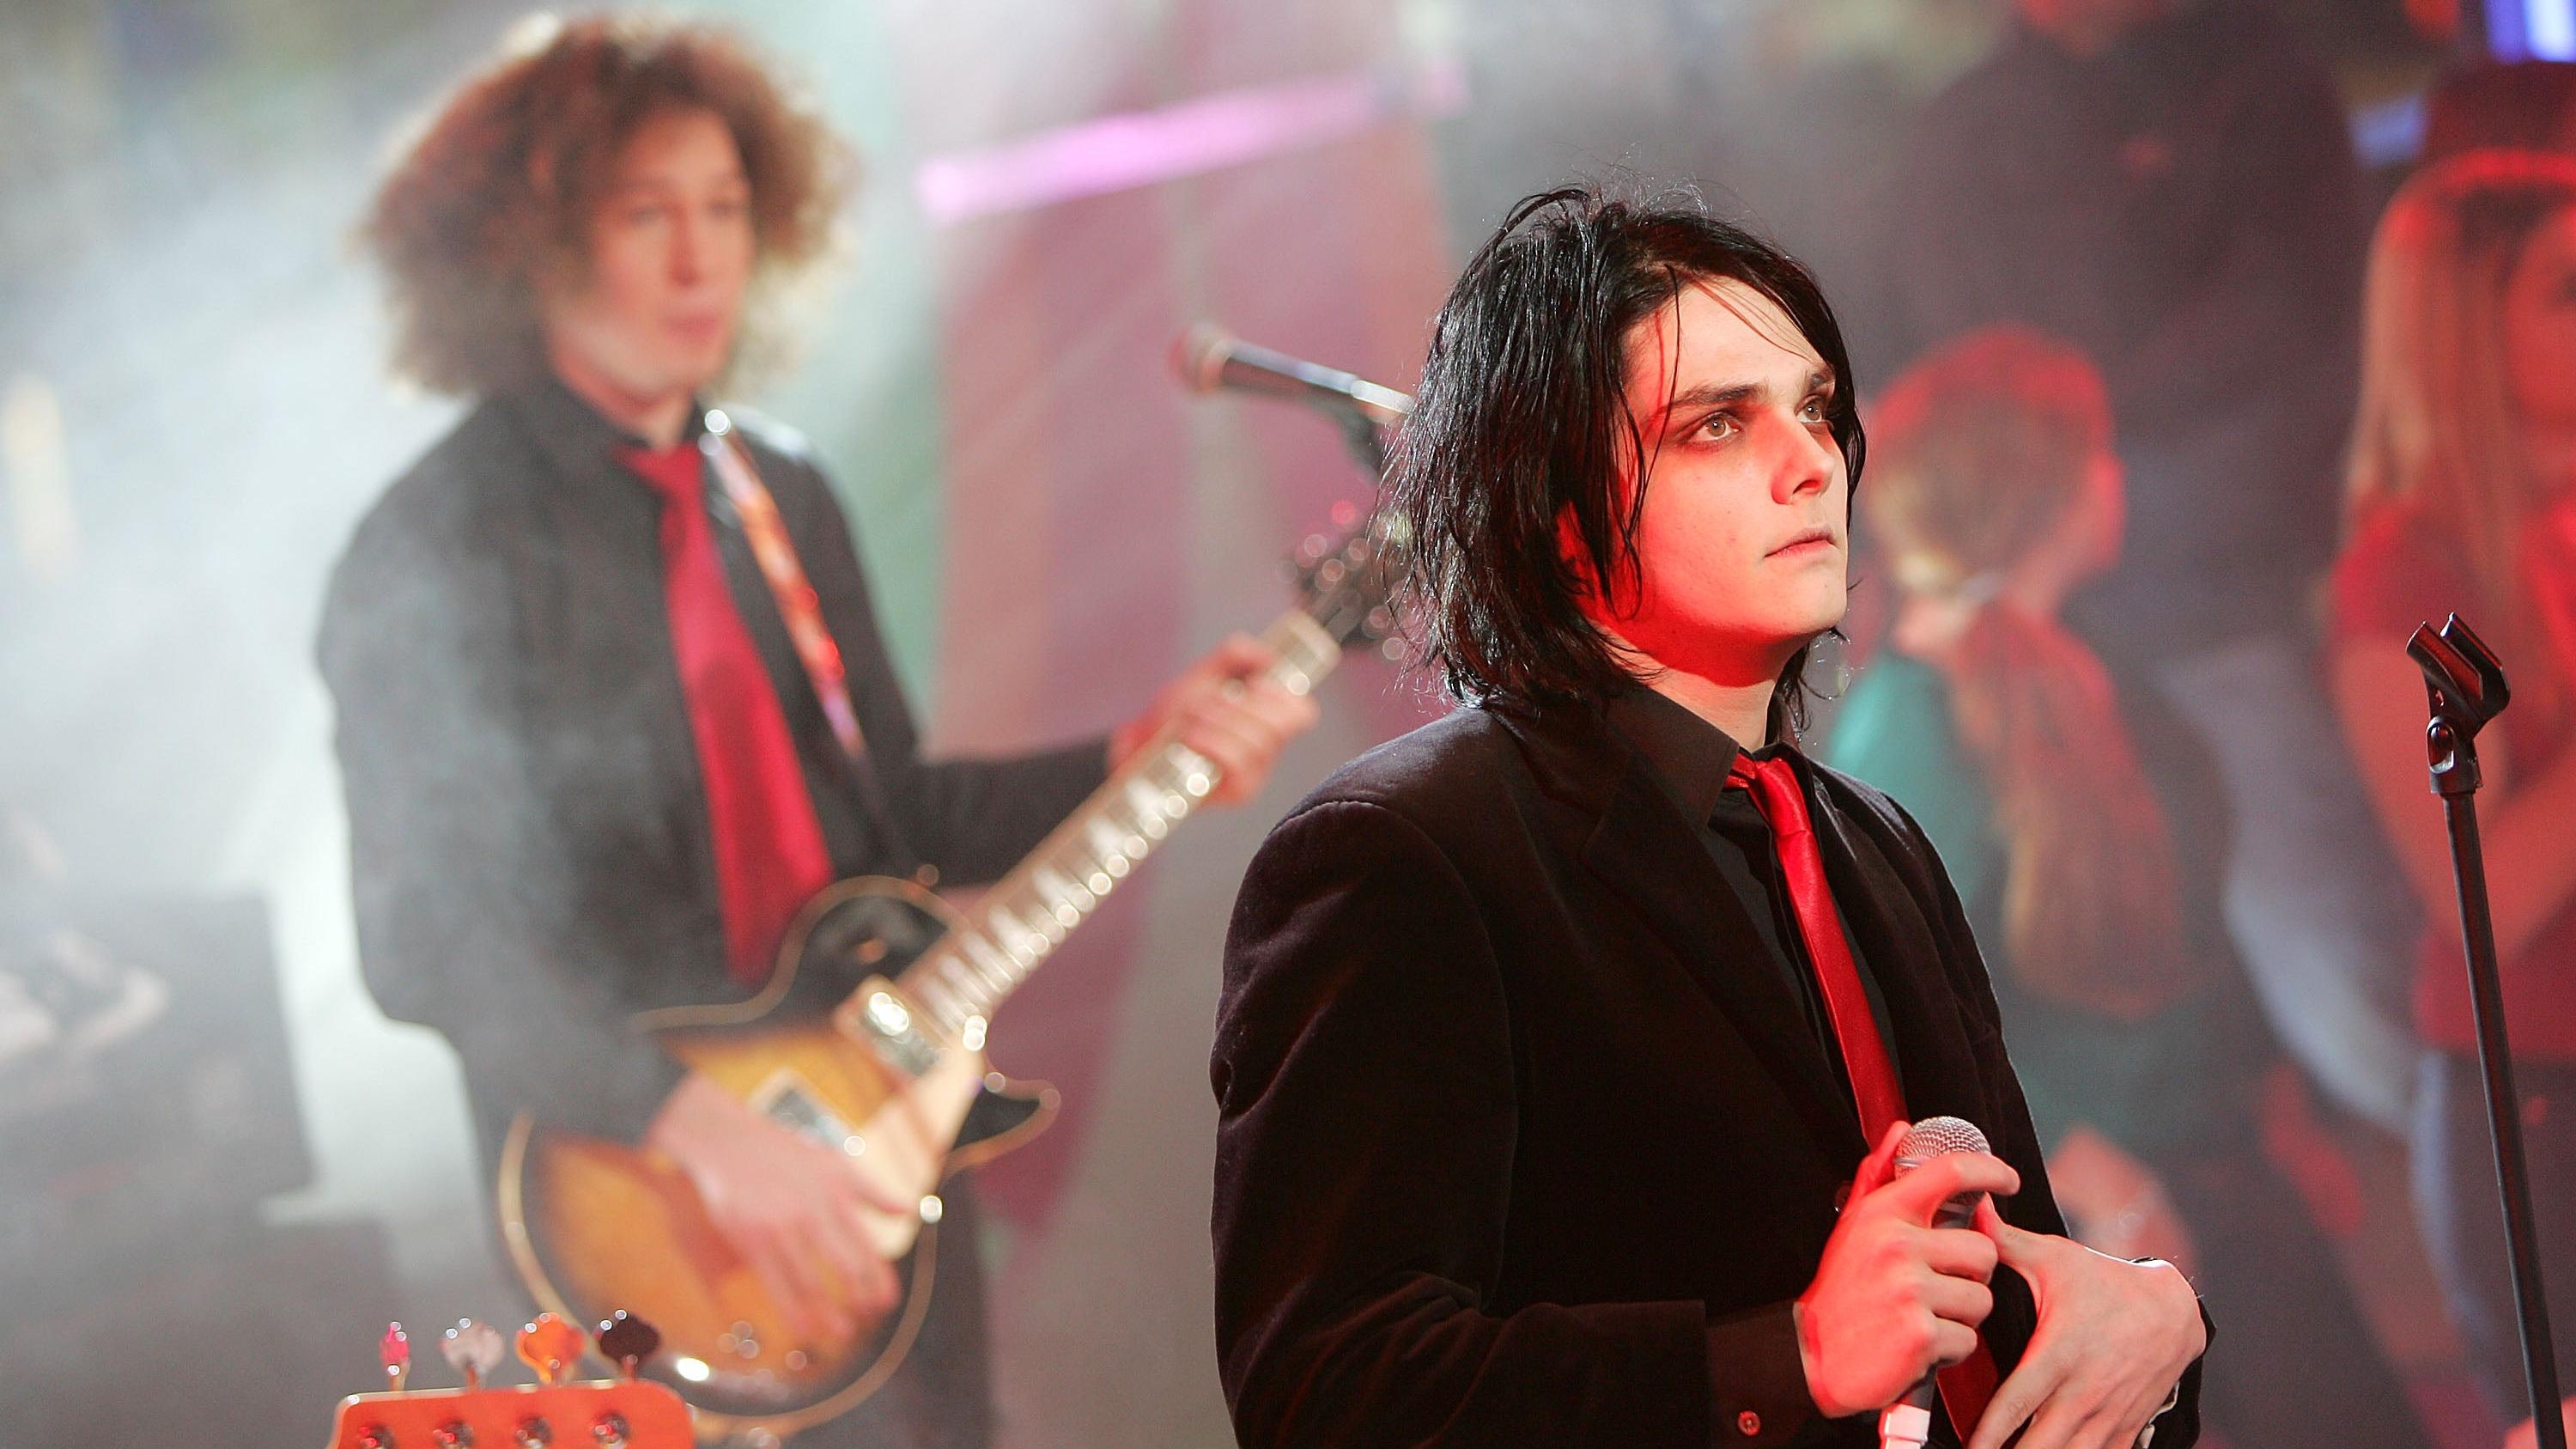 Read This: How Gerard Way getting punched helped propel My Chemical Romance to stardom